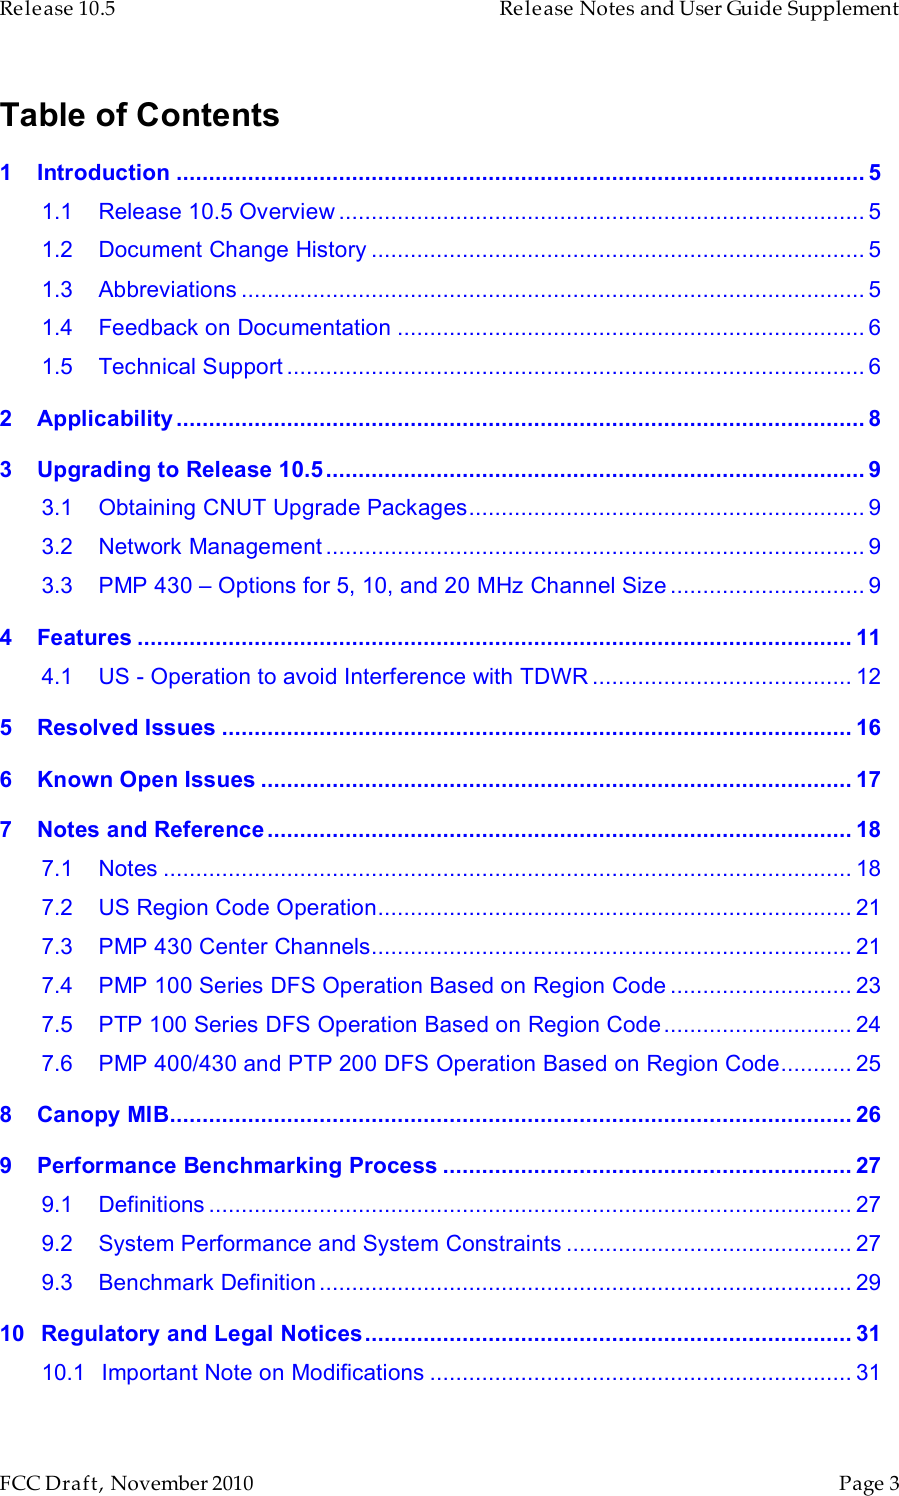 Release 10.5    Release Notes and User Guide Supplement      FCC Draft, November 2010  Page 3   Table of Contents 1 Introduction .......................................................................................................... 5 1.1 Release 10.5 Overview ................................................................................. 5 1.2 Document Change History ............................................................................ 5 1.3 Abbreviations ................................................................................................ 5 1.4 Feedback on Documentation ........................................................................ 6 1.5 Technical Support ......................................................................................... 6 2 Applicability .......................................................................................................... 8 3 Upgrading to Release 10.5................................................................................... 9 3.1 Obtaining CNUT Upgrade Packages............................................................. 9 3.2 Network Management ................................................................................... 9 3.3 PMP 430 – Options for 5, 10, and 20 MHz Channel Size .............................. 9 4 Features .............................................................................................................. 11 4.1 US - Operation to avoid Interference with TDWR ........................................ 12 5 Resolved Issues .................................................................................................16 6 Known Open Issues ........................................................................................... 17 7 Notes and Reference.......................................................................................... 18 7.1 Notes .......................................................................................................... 18 7.2 US Region Code Operation......................................................................... 21 7.3 PMP 430 Center Channels.......................................................................... 21 7.4 PMP 100 Series DFS Operation Based on Region Code ............................ 23 7.5 PTP 100 Series DFS Operation Based on Region Code............................. 24 7.6 PMP 400/430 and PTP 200 DFS Operation Based on Region Code........... 25 8 Canopy MIB......................................................................................................... 26 9 Performance Benchmarking Process ............................................................... 27 9.1 Definitions ................................................................................................... 27 9.2 System Performance and System Constraints ............................................ 27 9.3 Benchmark Definition .................................................................................. 29 10 Regulatory and Legal Notices........................................................................... 31 10.1 Important Note on Modifications .................................................................31 